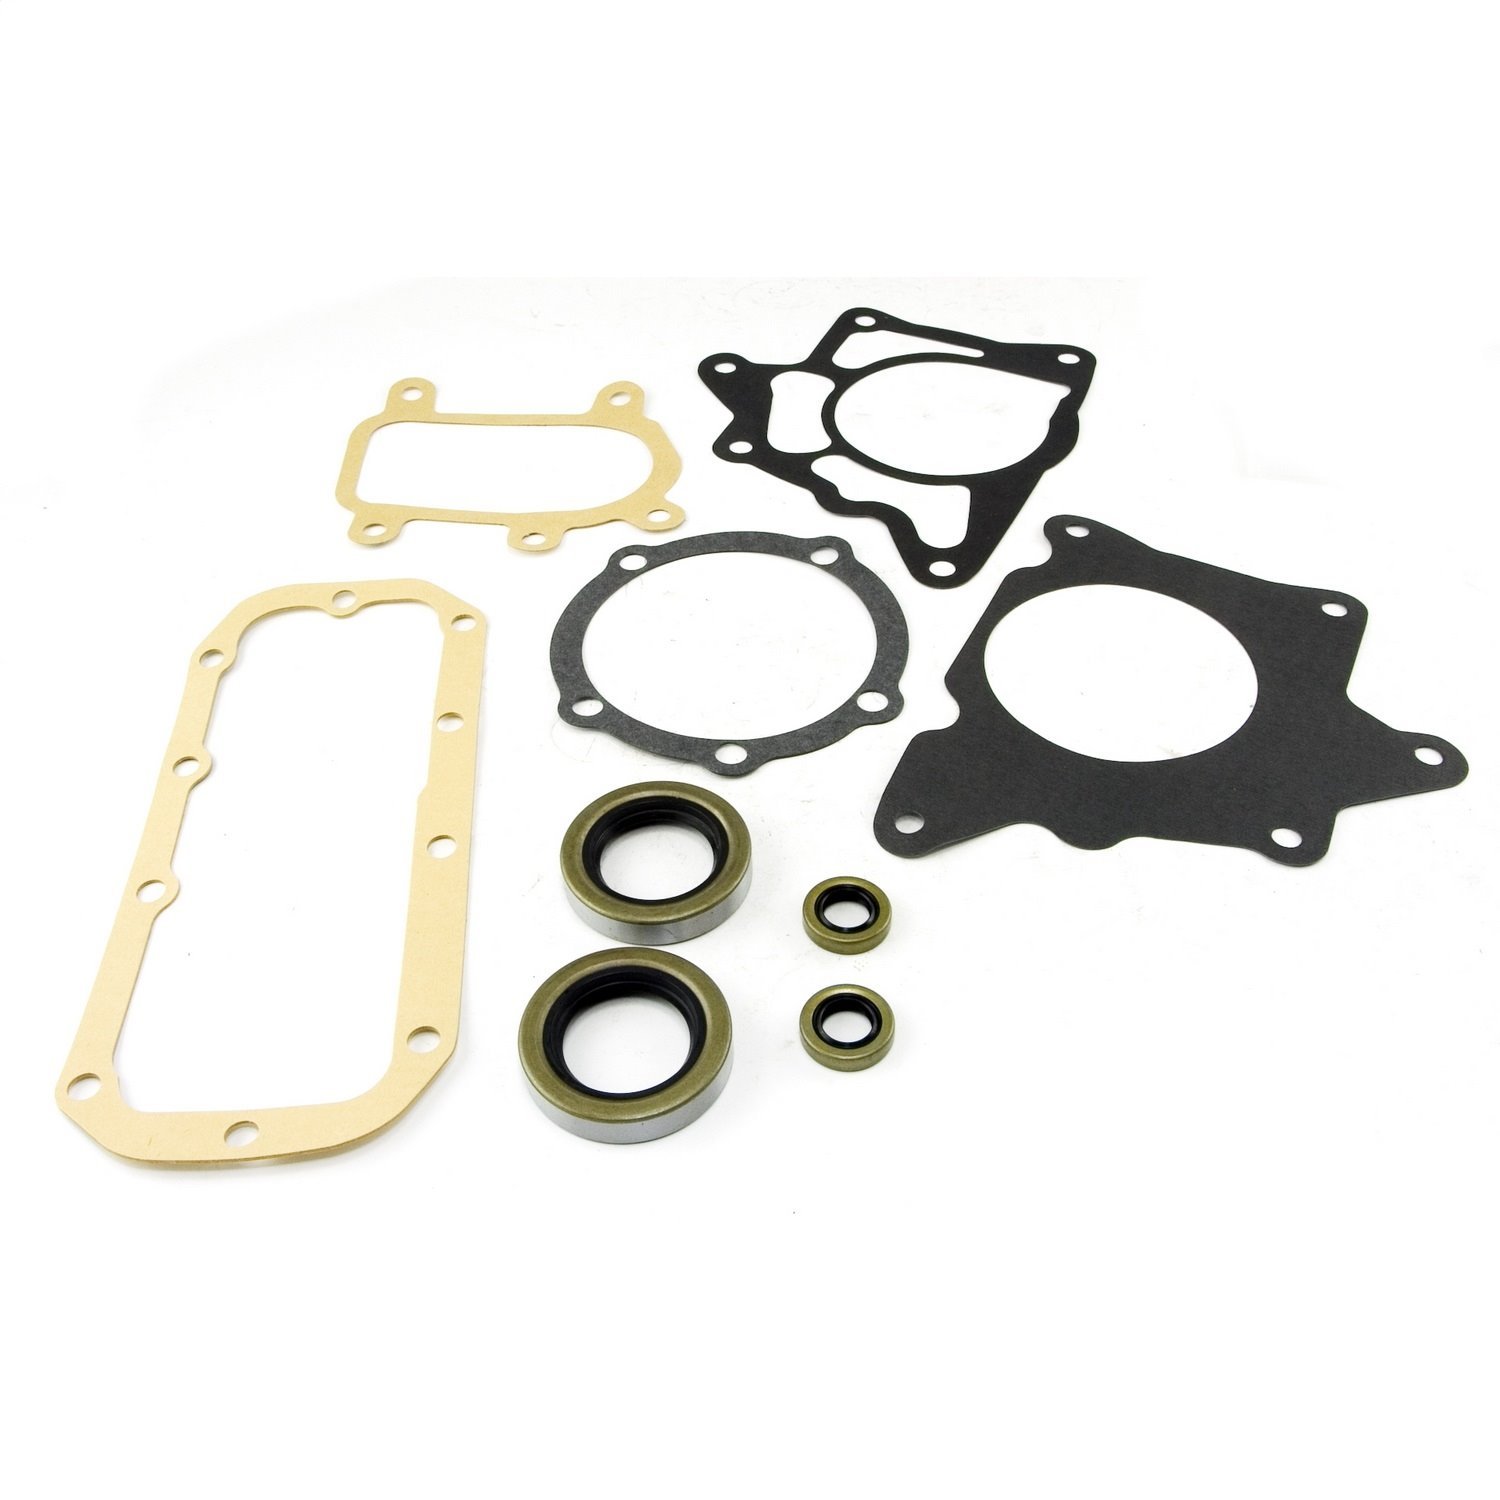 This transfer case gasket and seal kit from